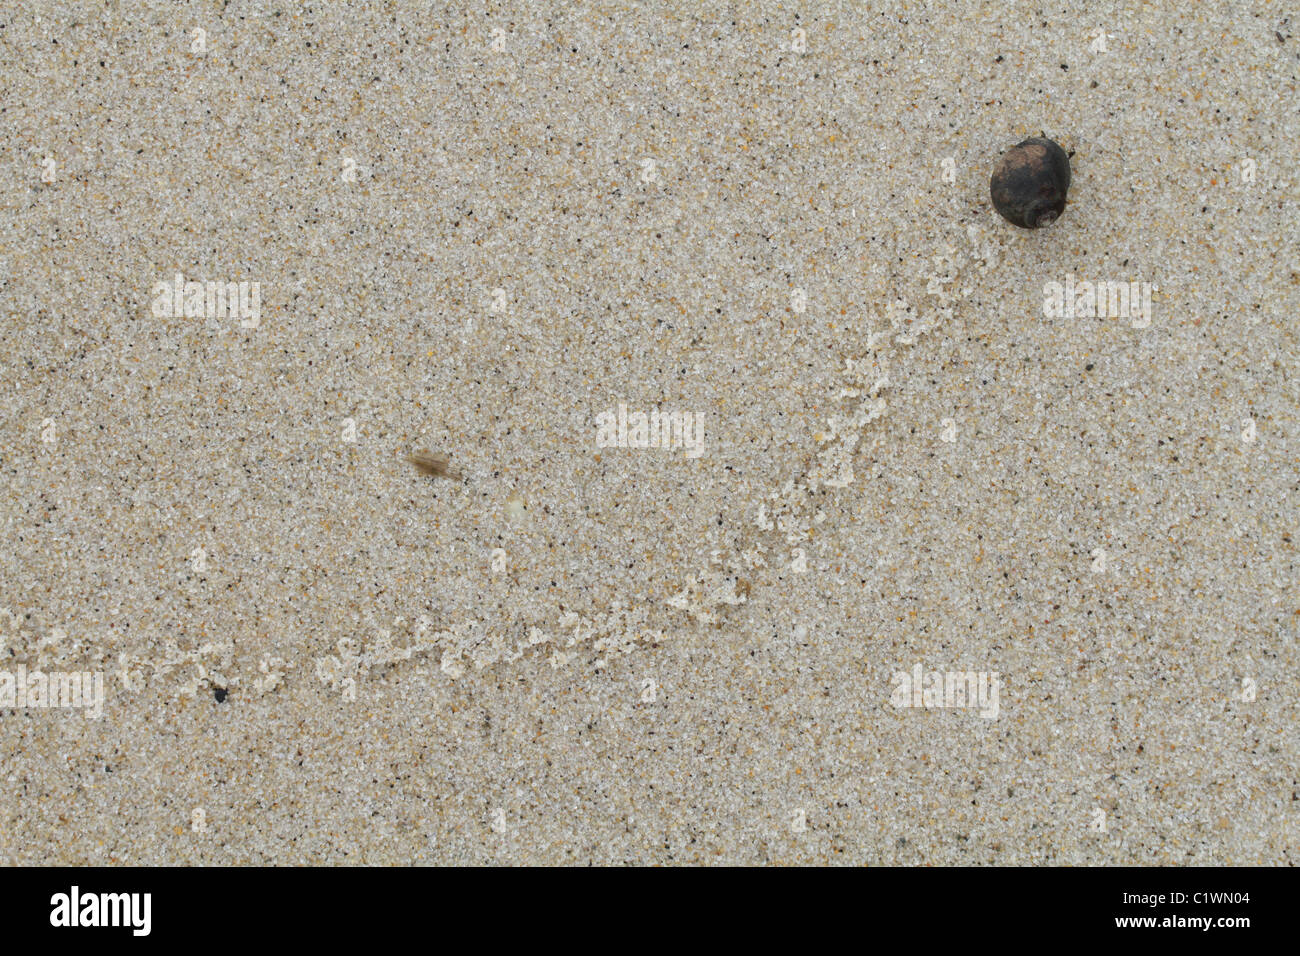 The trail of a common periwinkle, Littorina littorea, across a sandy beach at low tide. Stock Photo